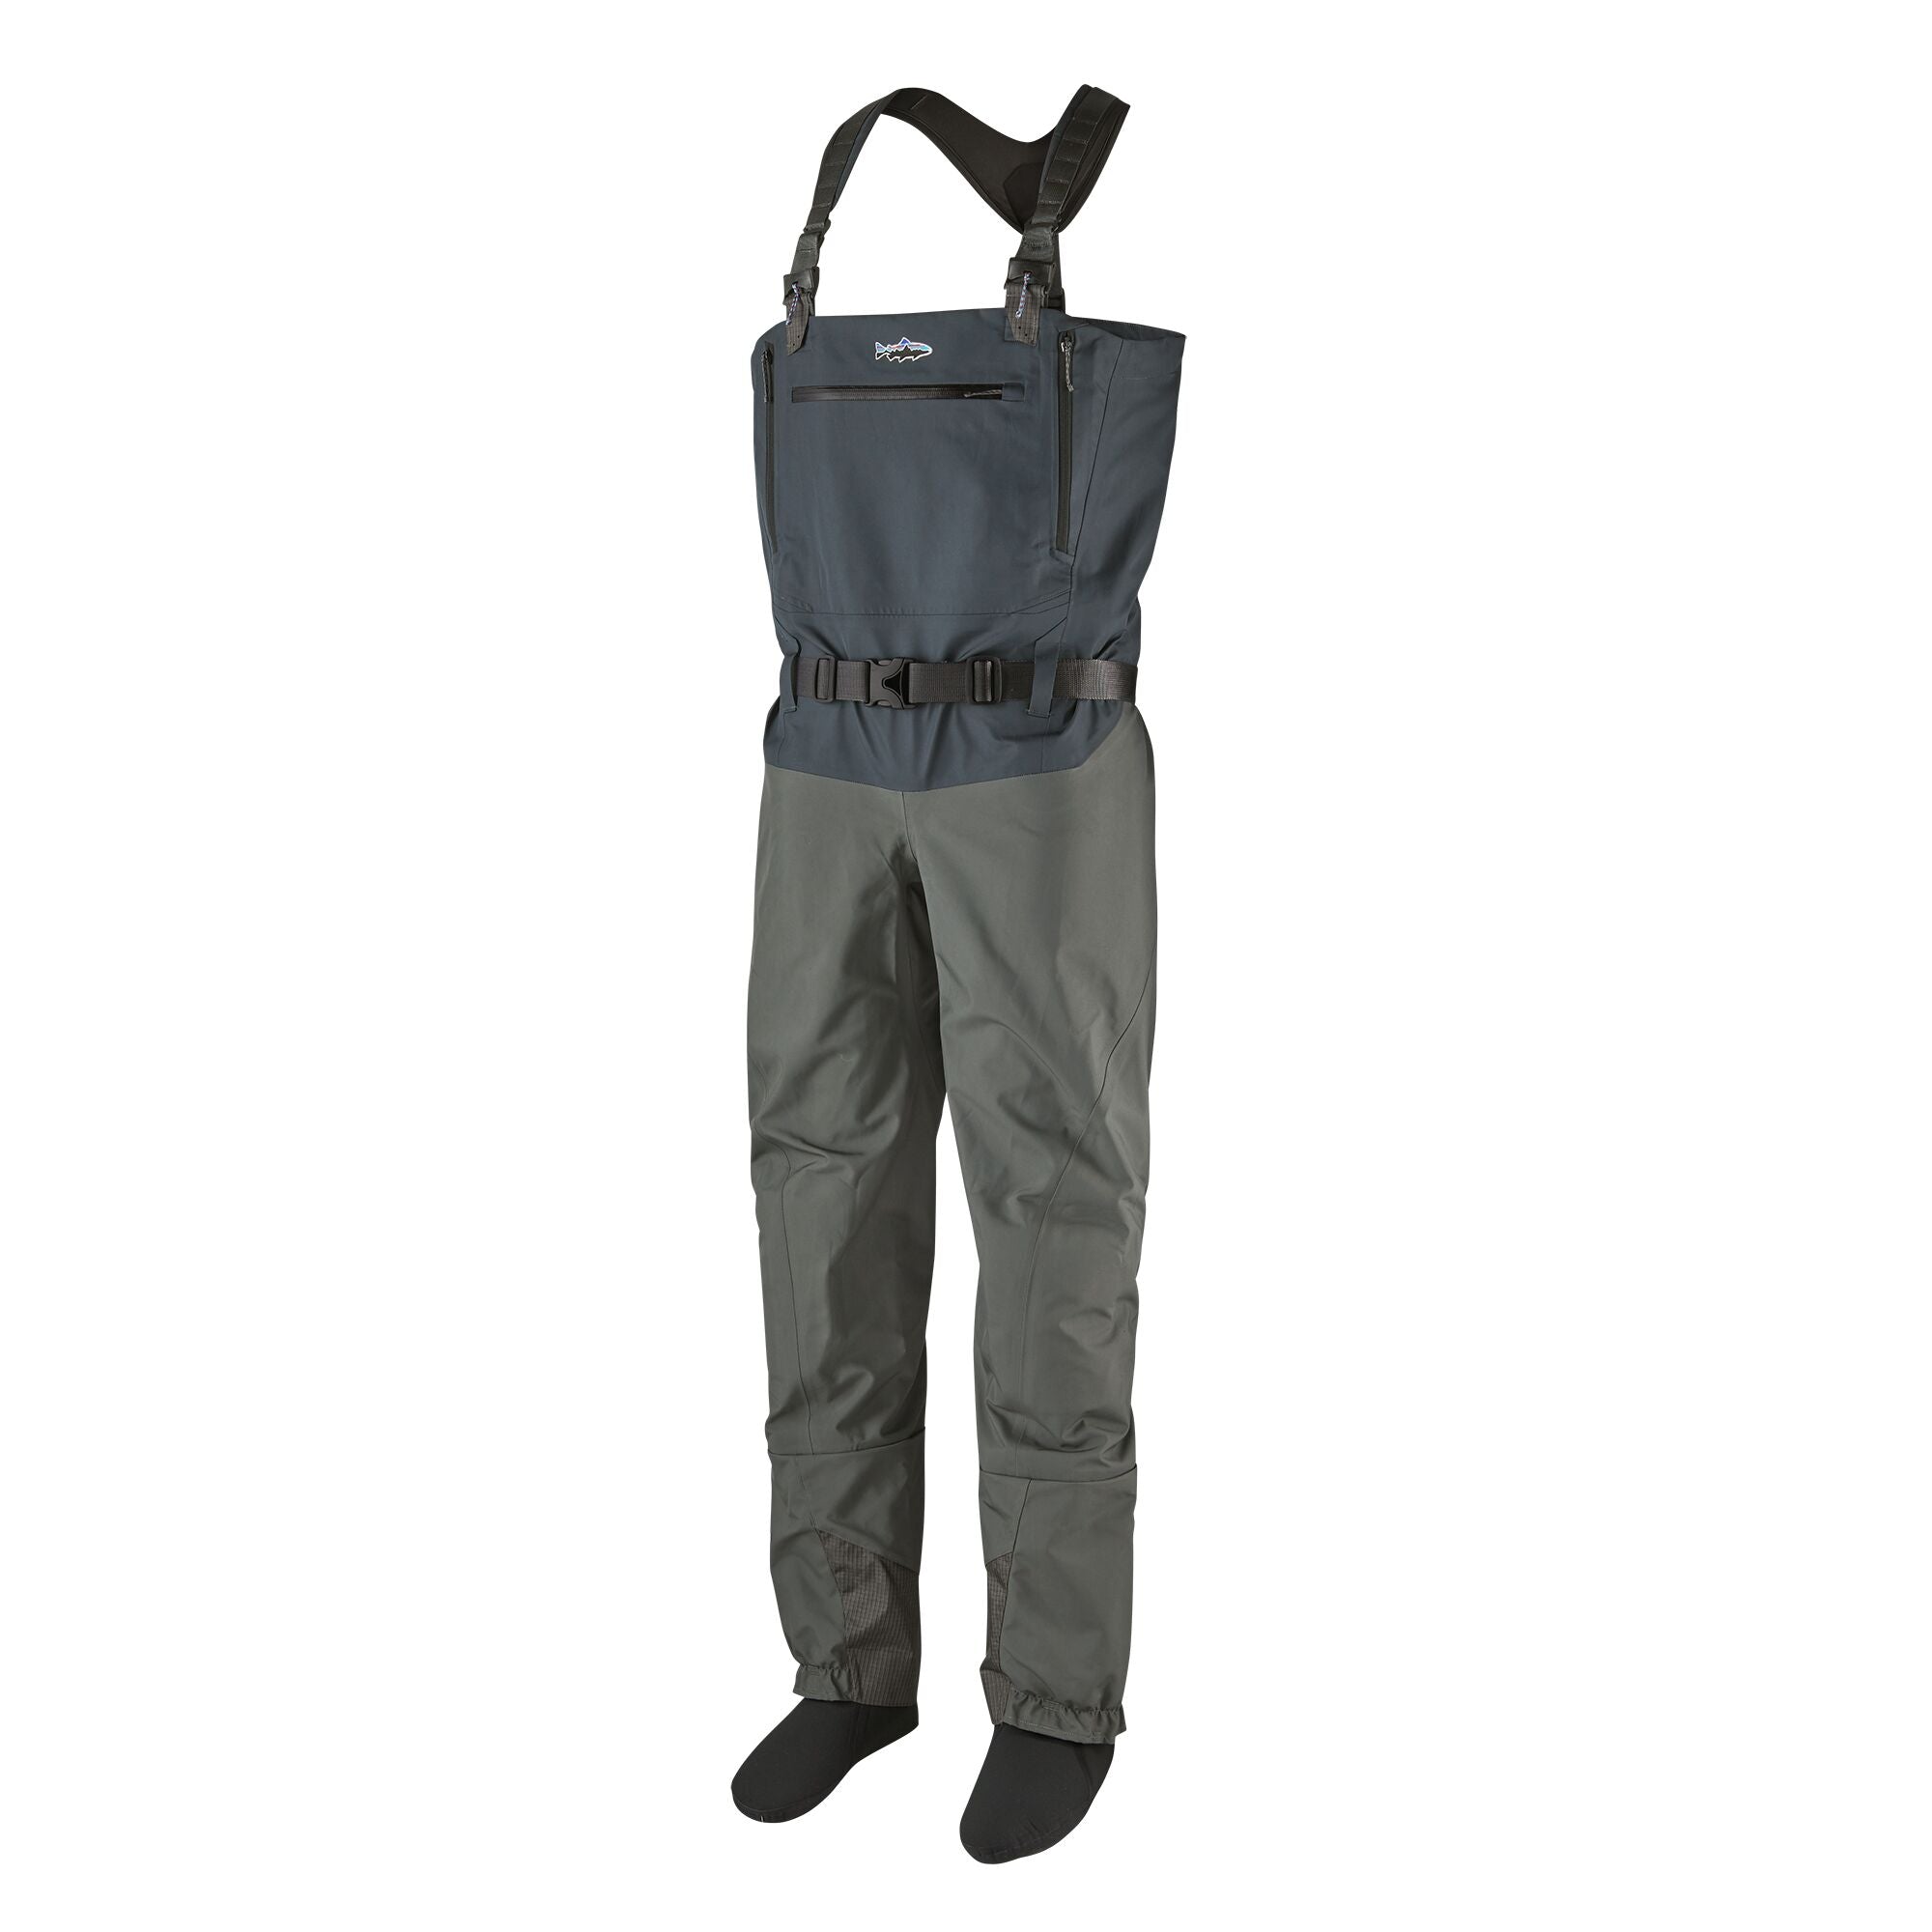 Simms Launches New 'Flyweight' Waders & Gear Collection - Man